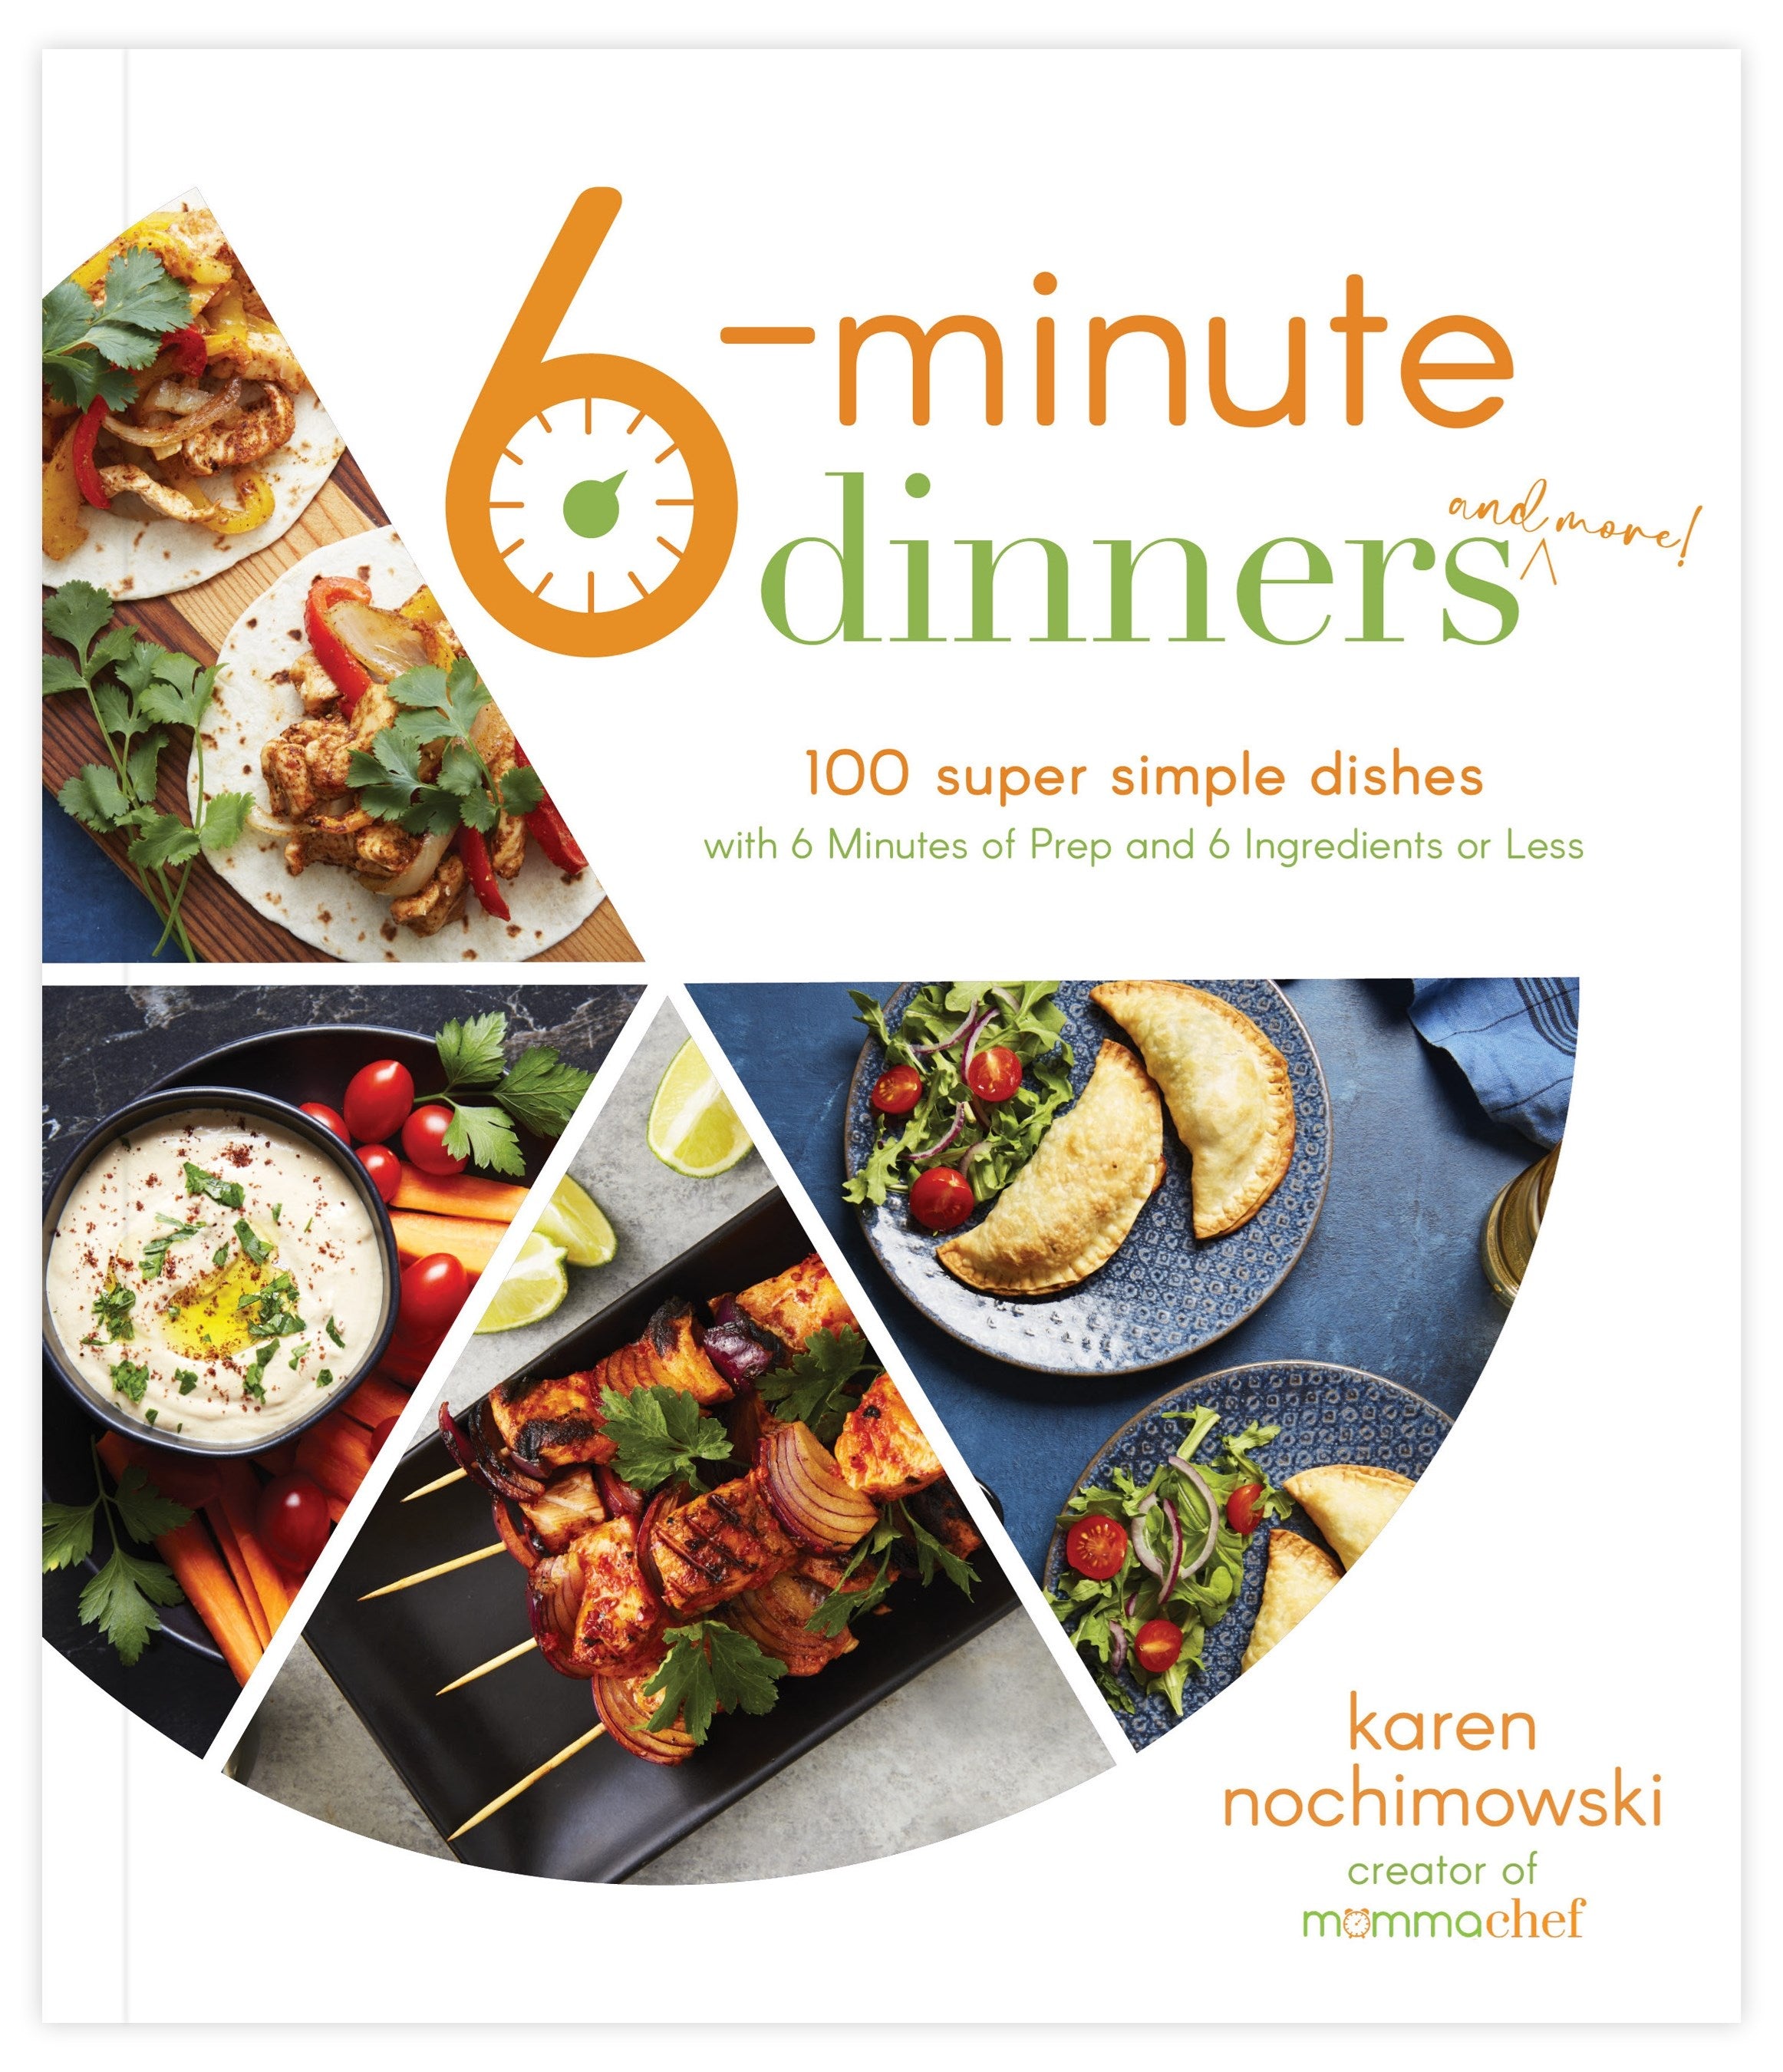 6-Minute Dinners (and More!): 100 Super Simple Dishes with 6 Minutes of Prep and 6 Ingredients or Less